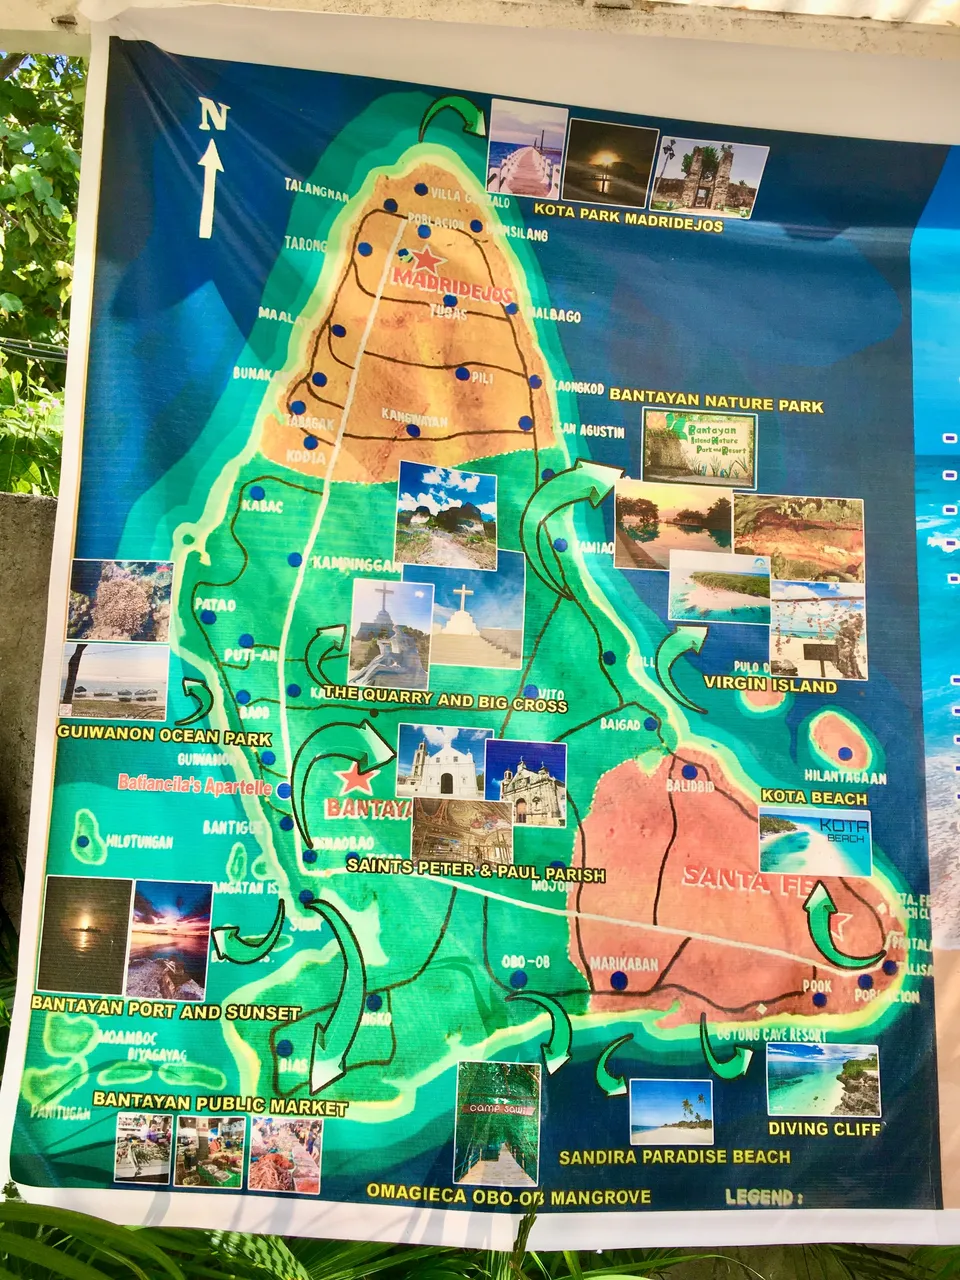 A map of Bantayan Island with famous landmarks is put up in front of our apartelle to guide tourists